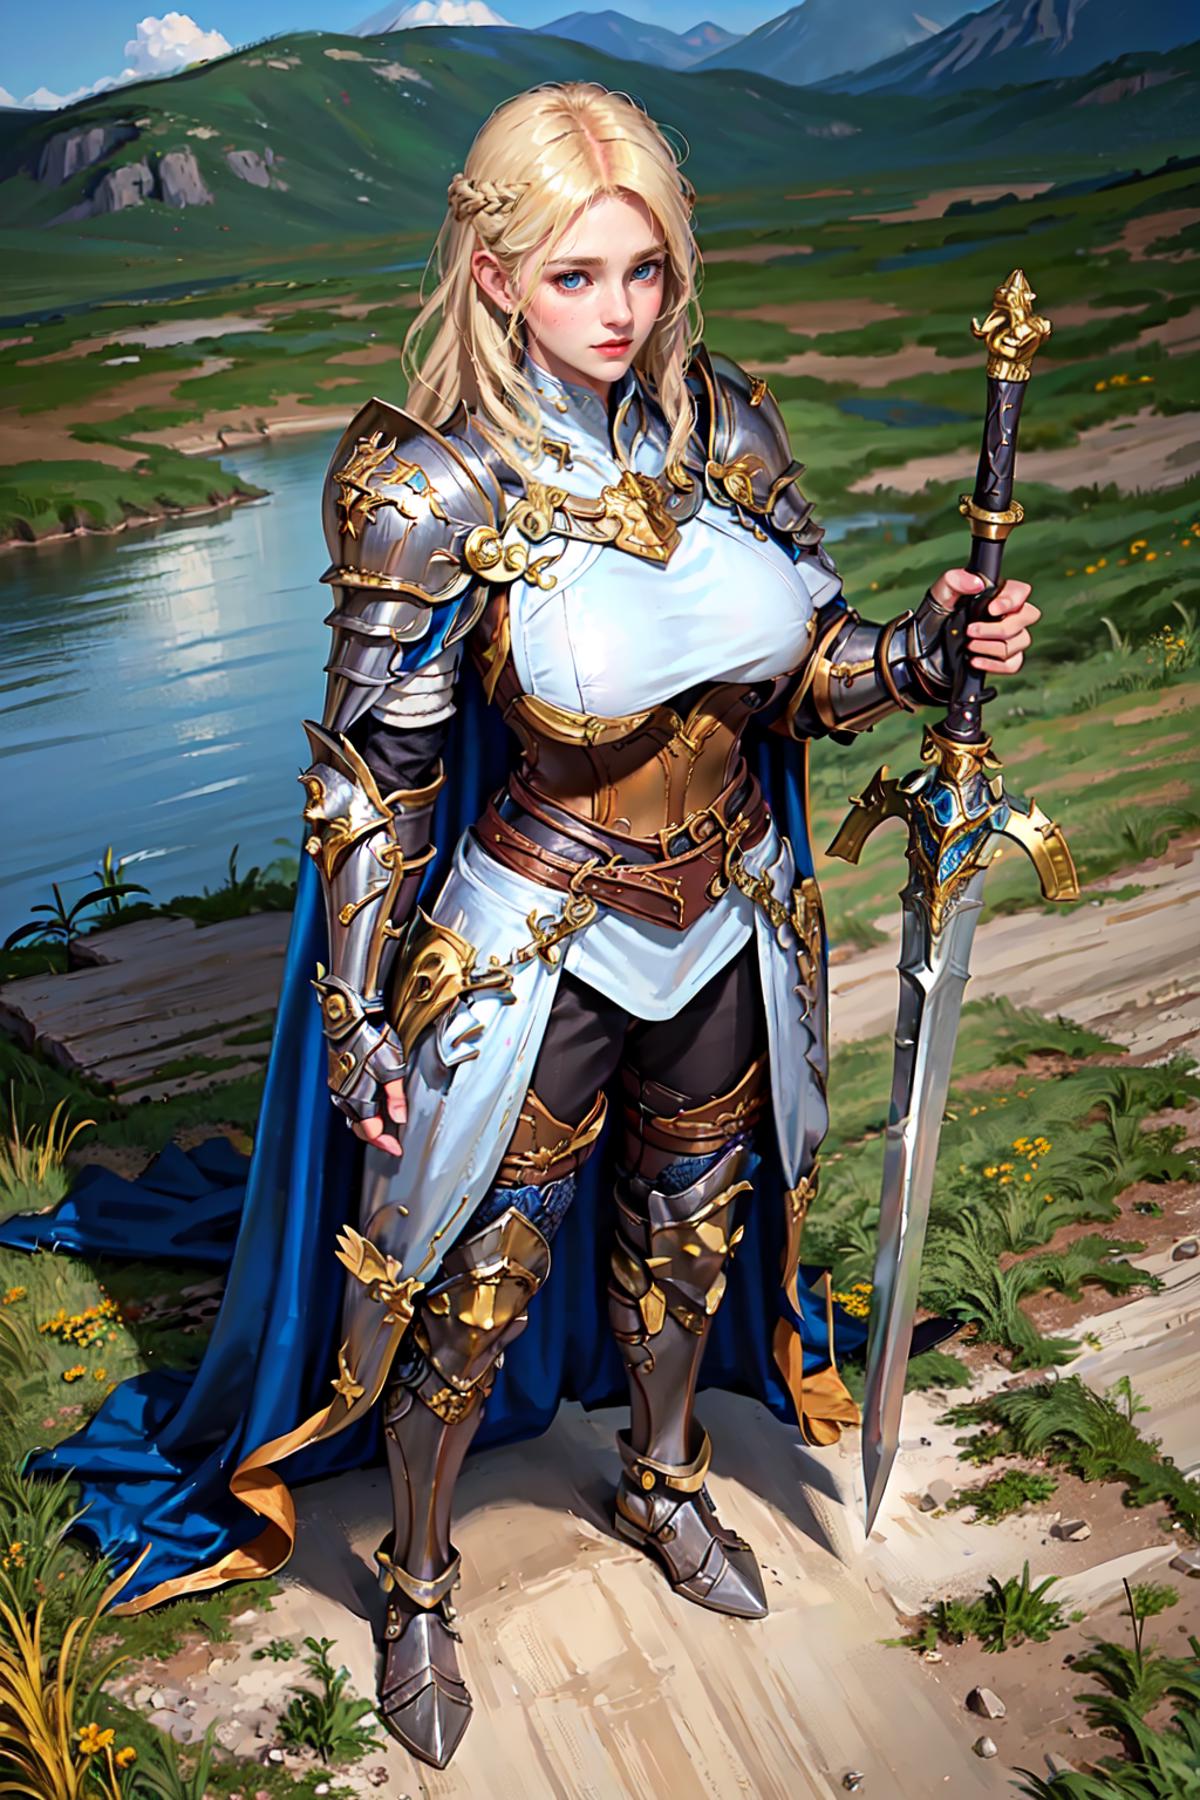 Female knight with holding a sword(reverse grip) image by passinghunter1214911